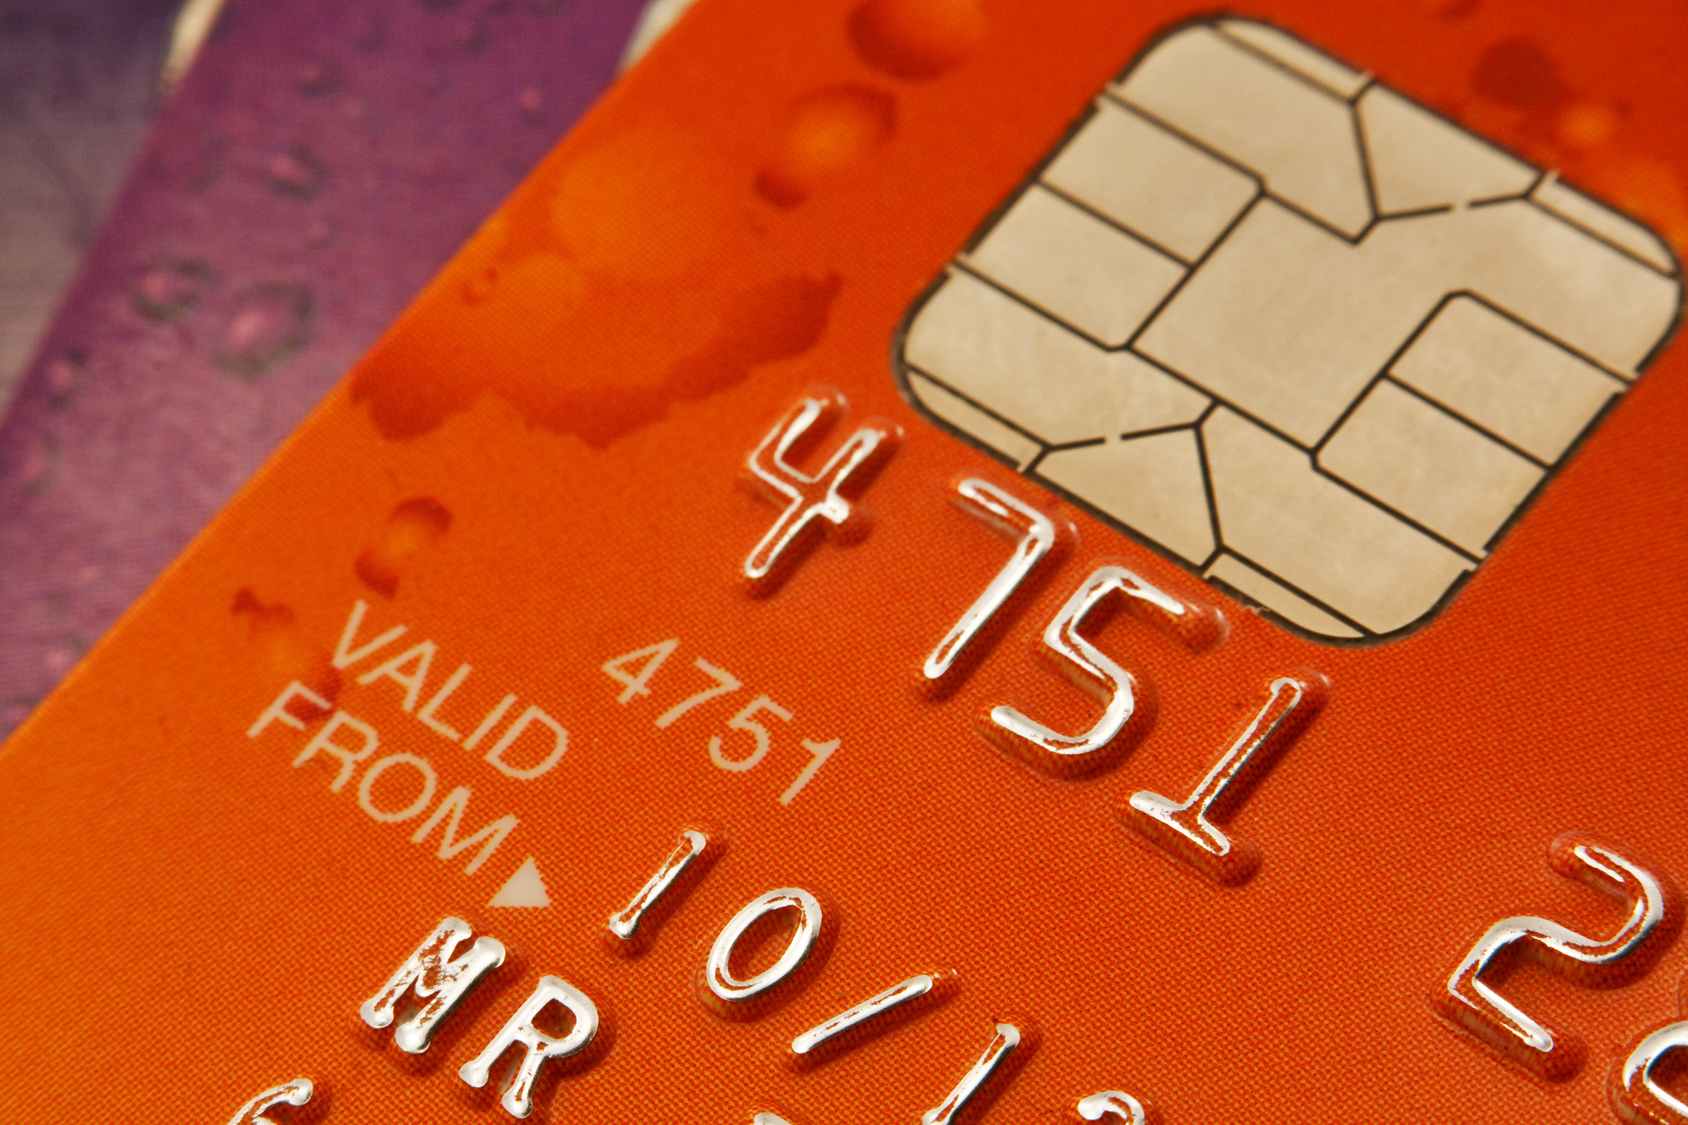 Plastic Bank cards with focus on the Chip and pin security device